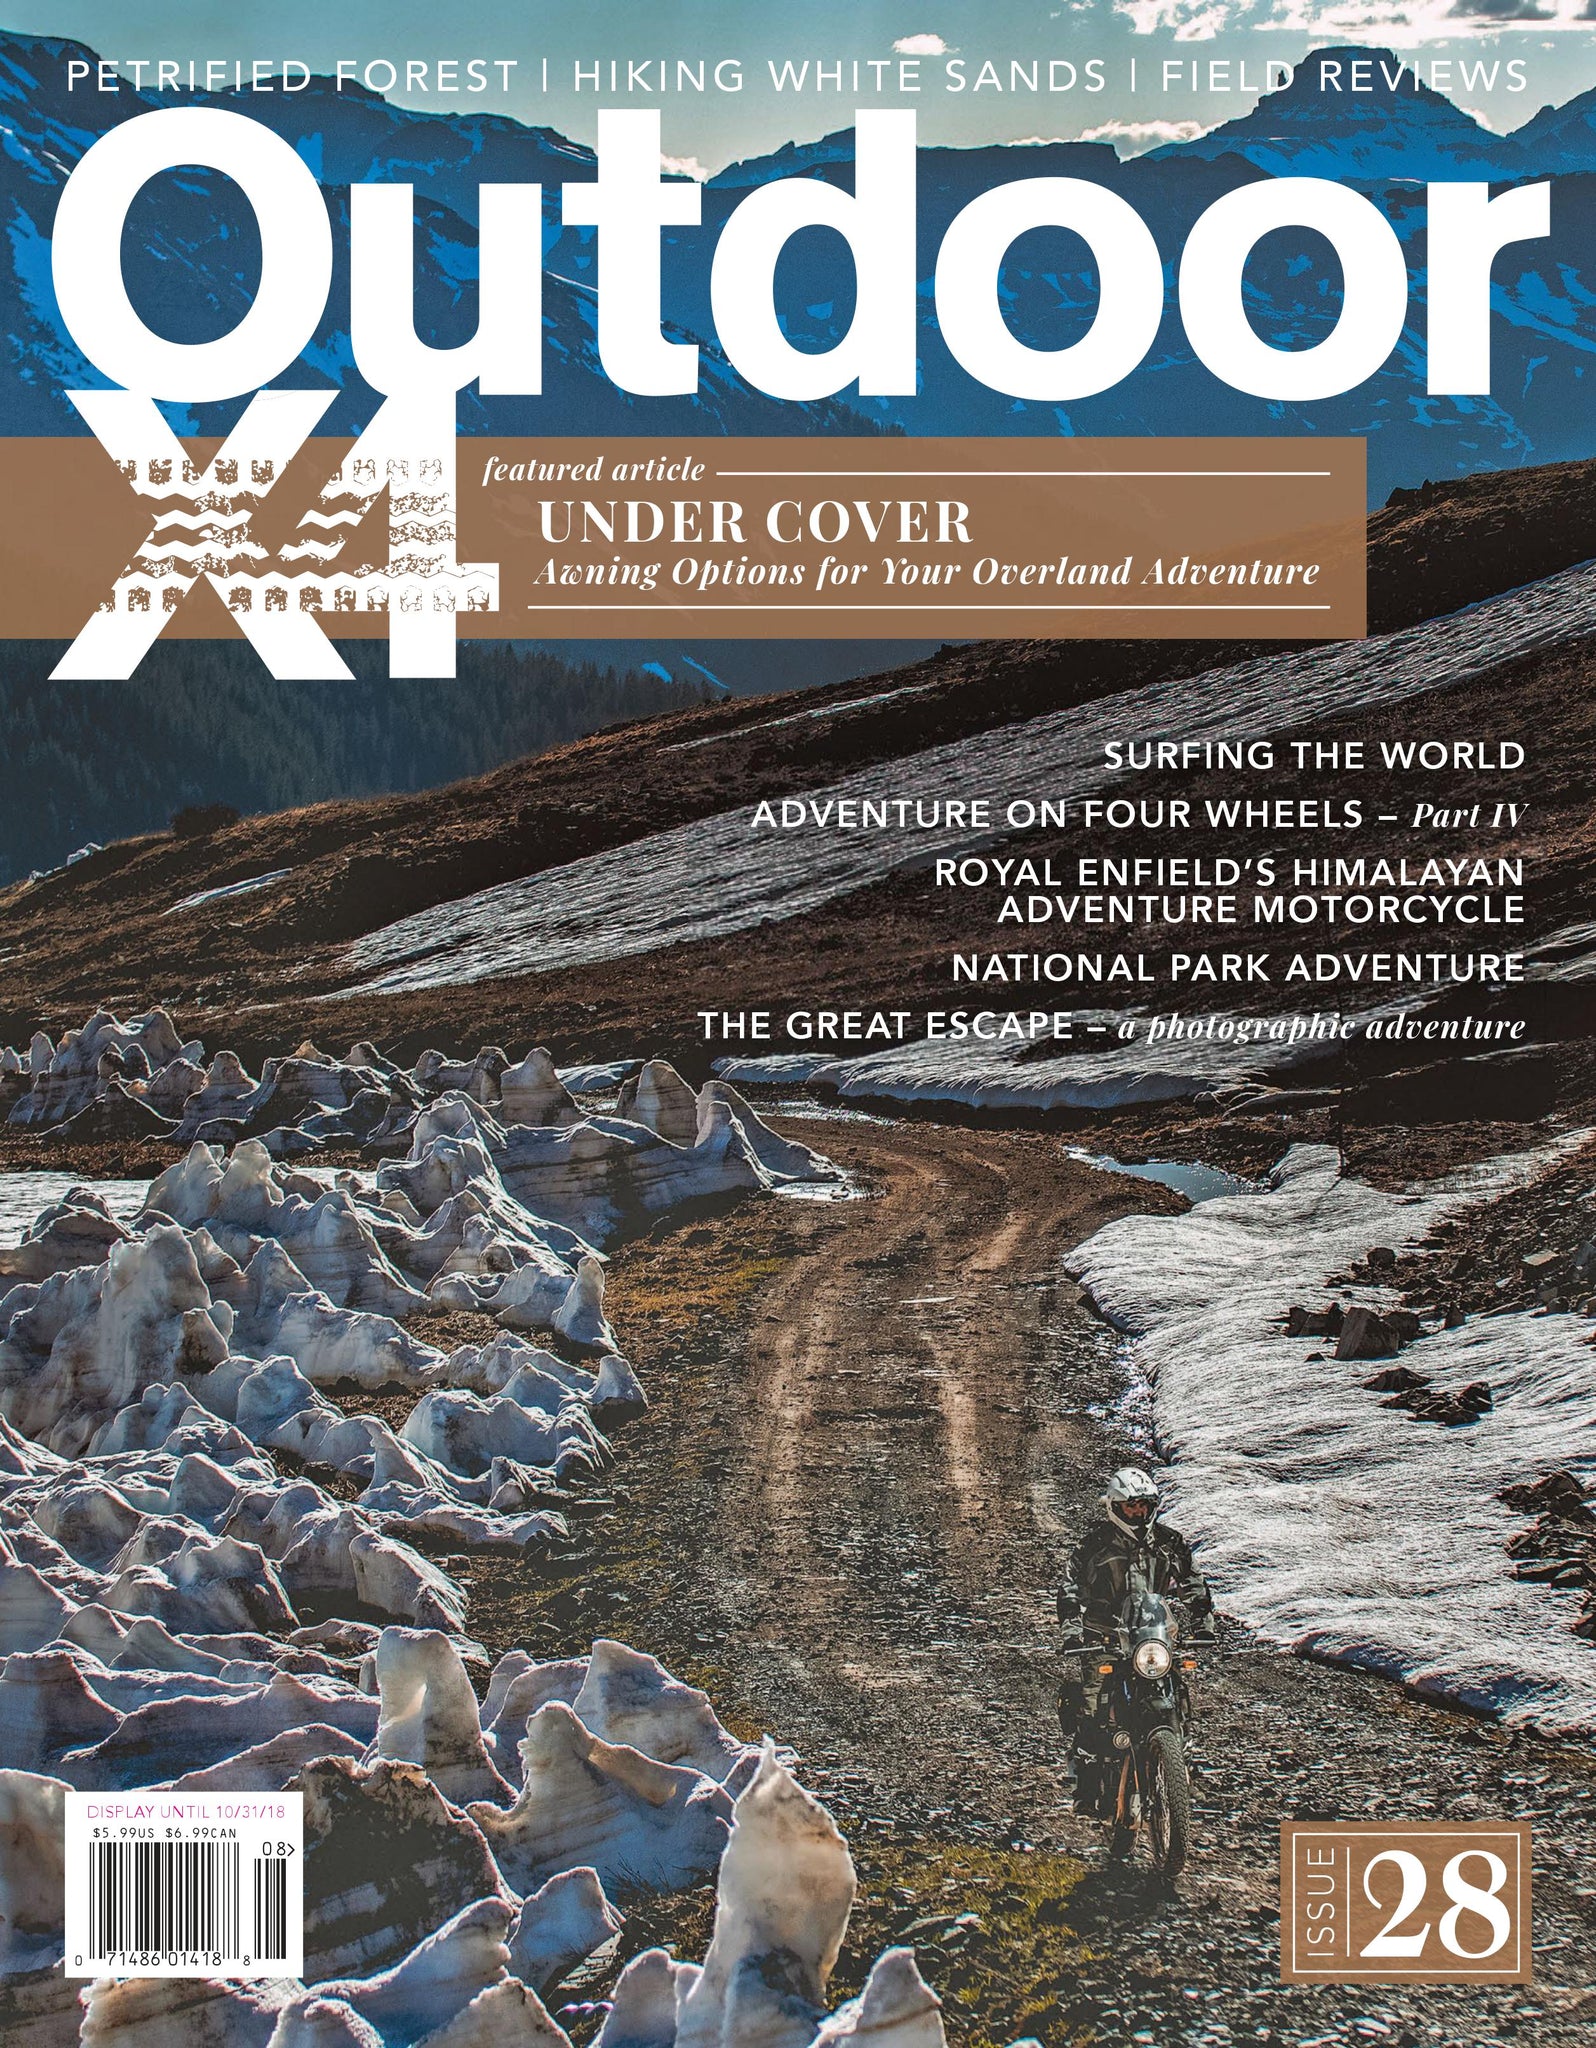 outdoorx4 28 issue showerpouch shower pouch article